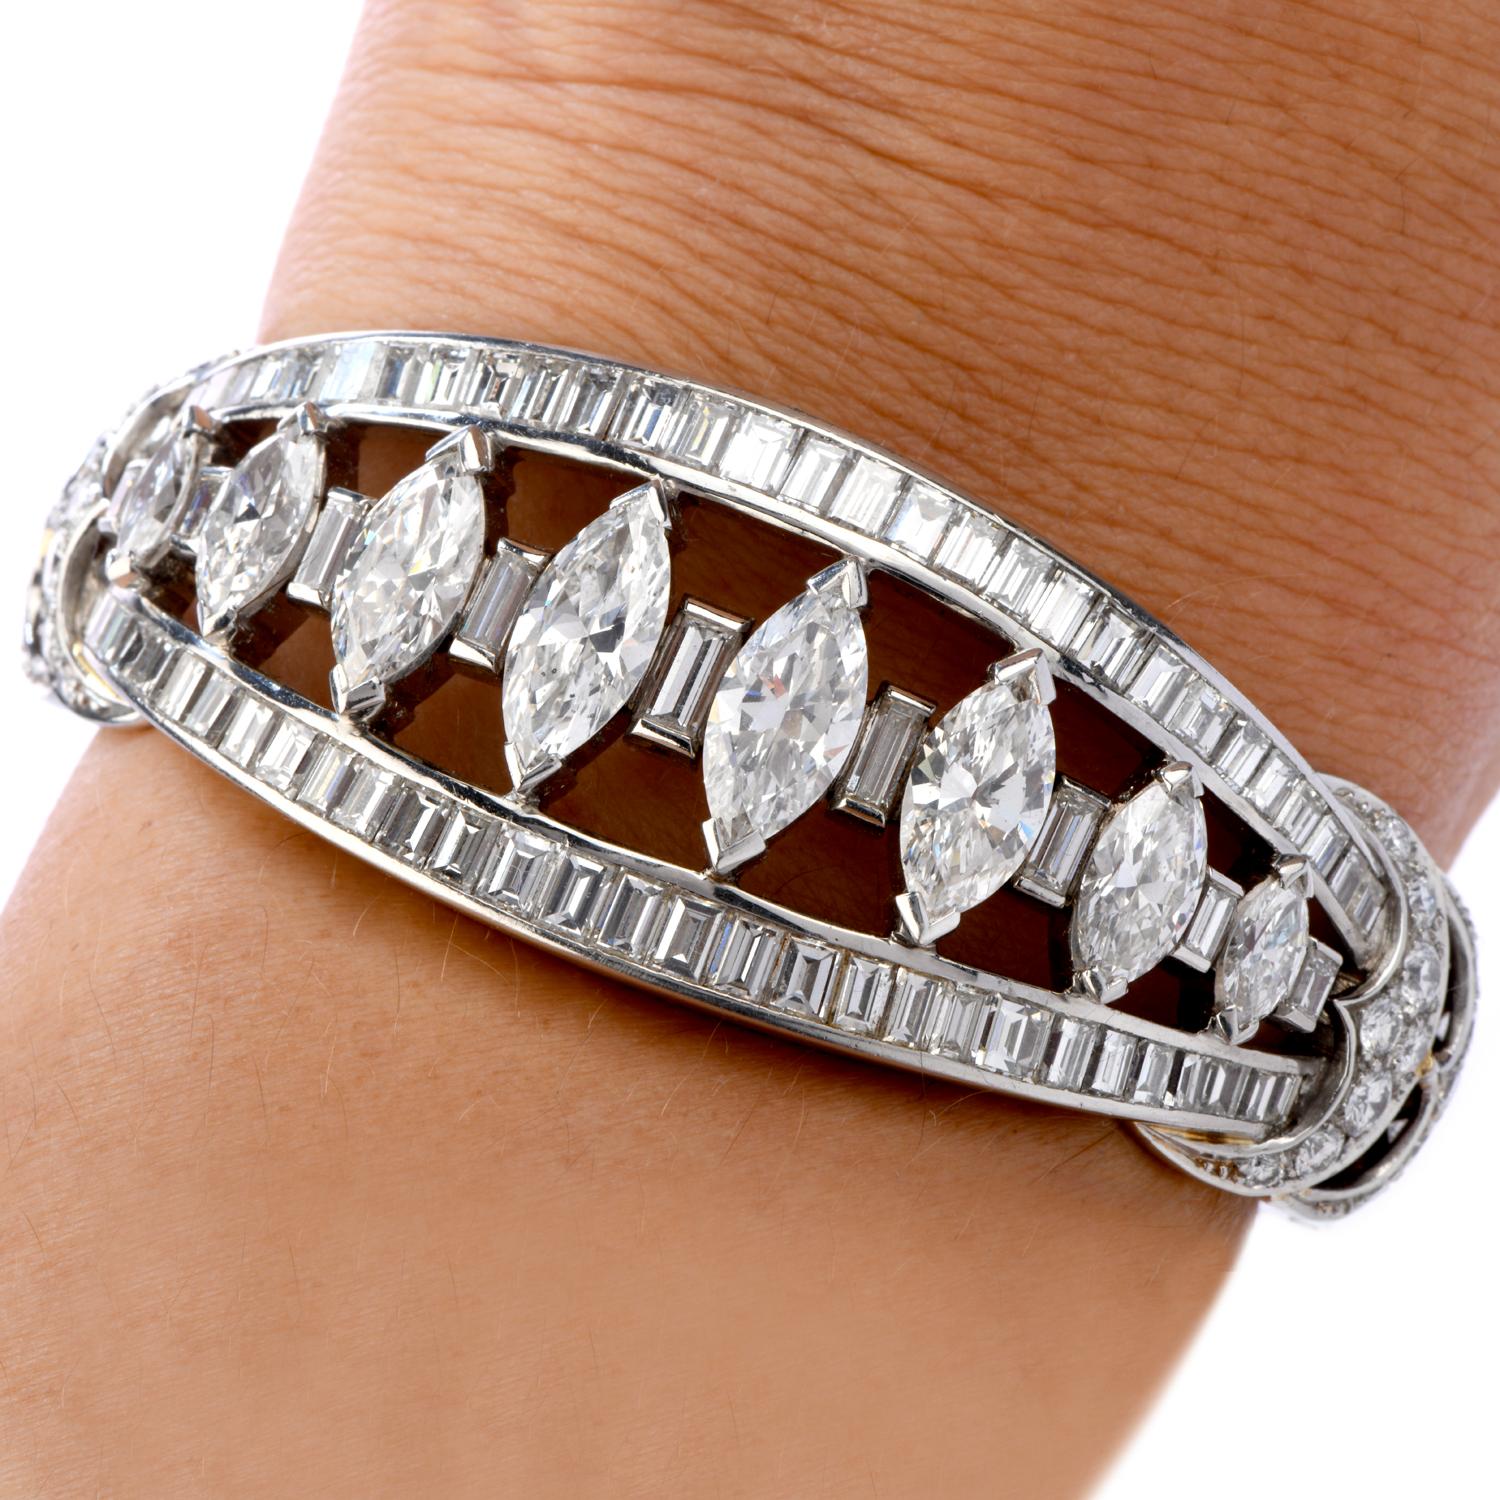 Adorn your wrist with this exquisite Vintage platinum, and 18k Gold cuff Diamond bangle bracelet set with marquise, baguette, and round-cut diamonds. This Antique Deco bracelet has double-hinged ends for ease of wear.

\Metal Type:  Platinum

Total